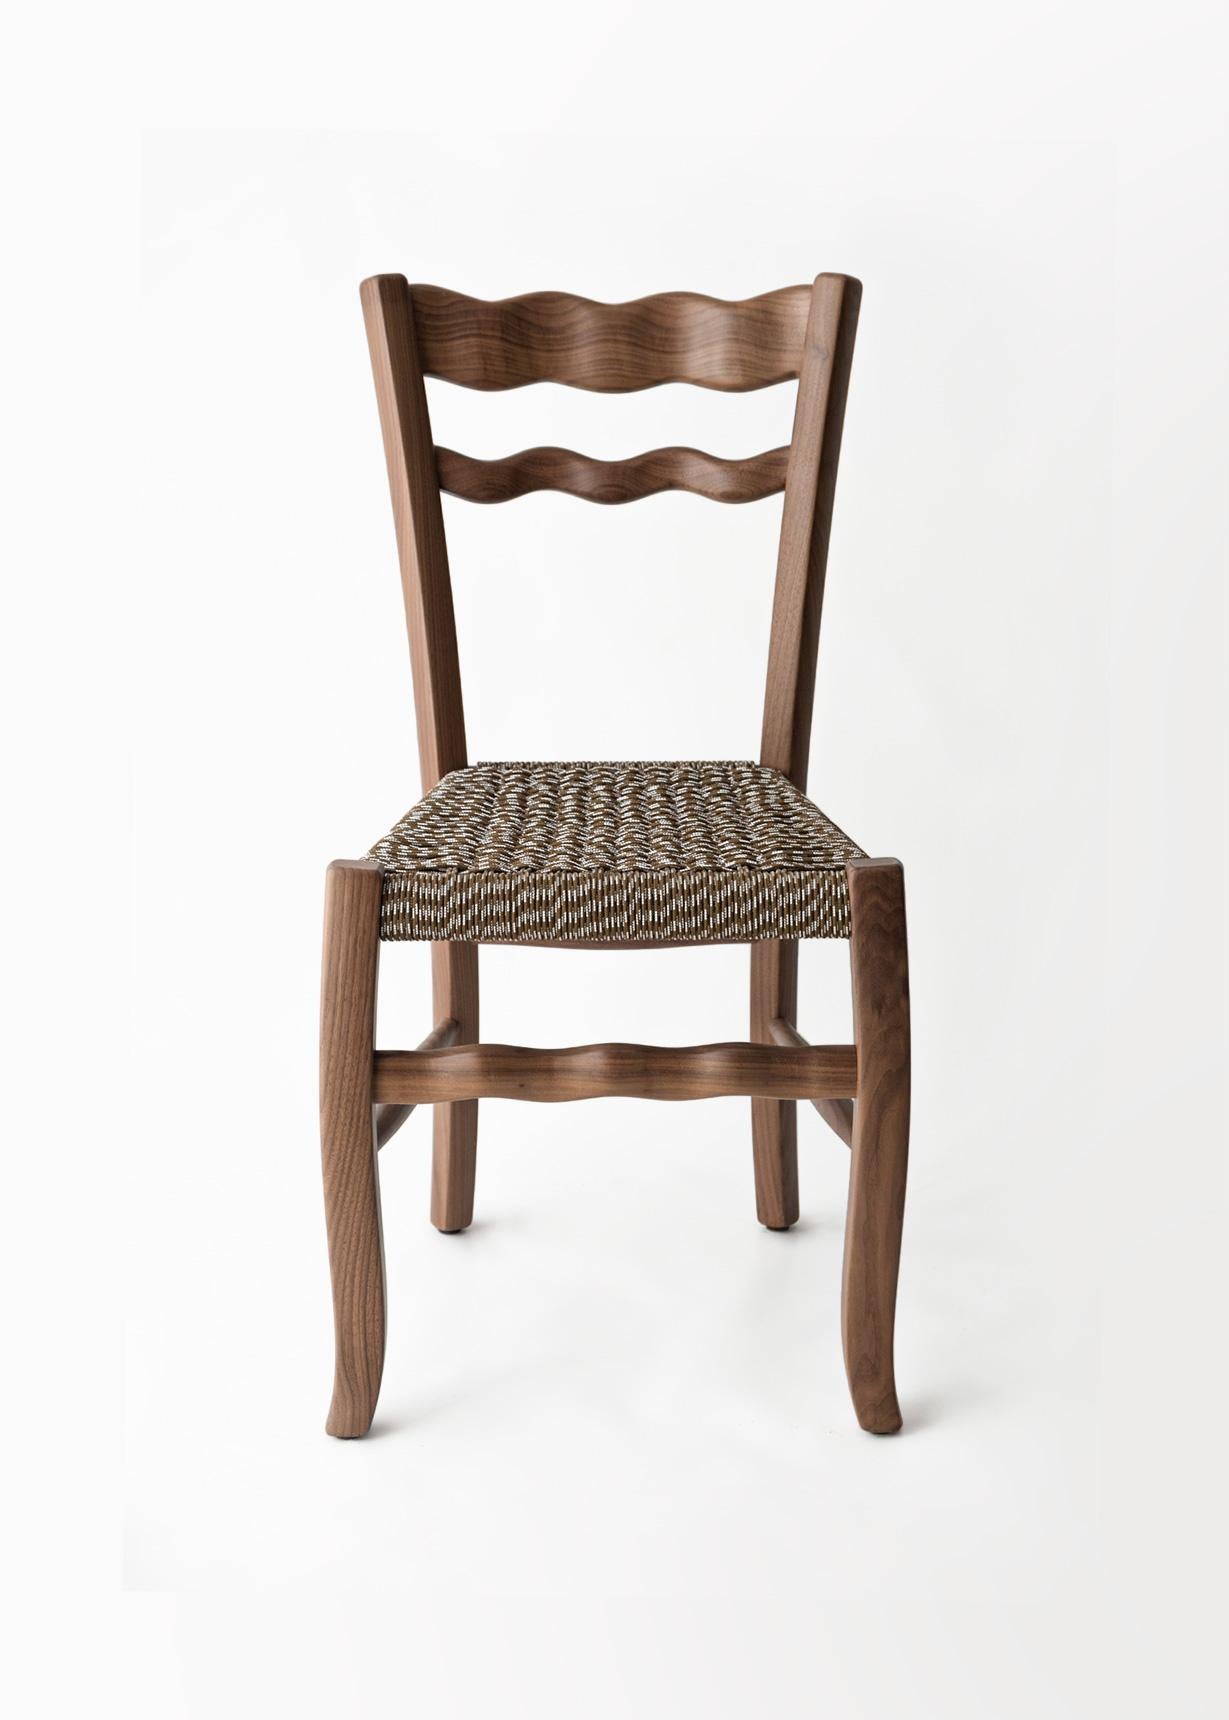 The vernacular archetype of the countryside chair has been redesigned by the Italian designer Antonio Aricò and made by MYOP, a Sicilian based family company, known around the world for its eclectic approach to craftmanship furniture and design.
“A